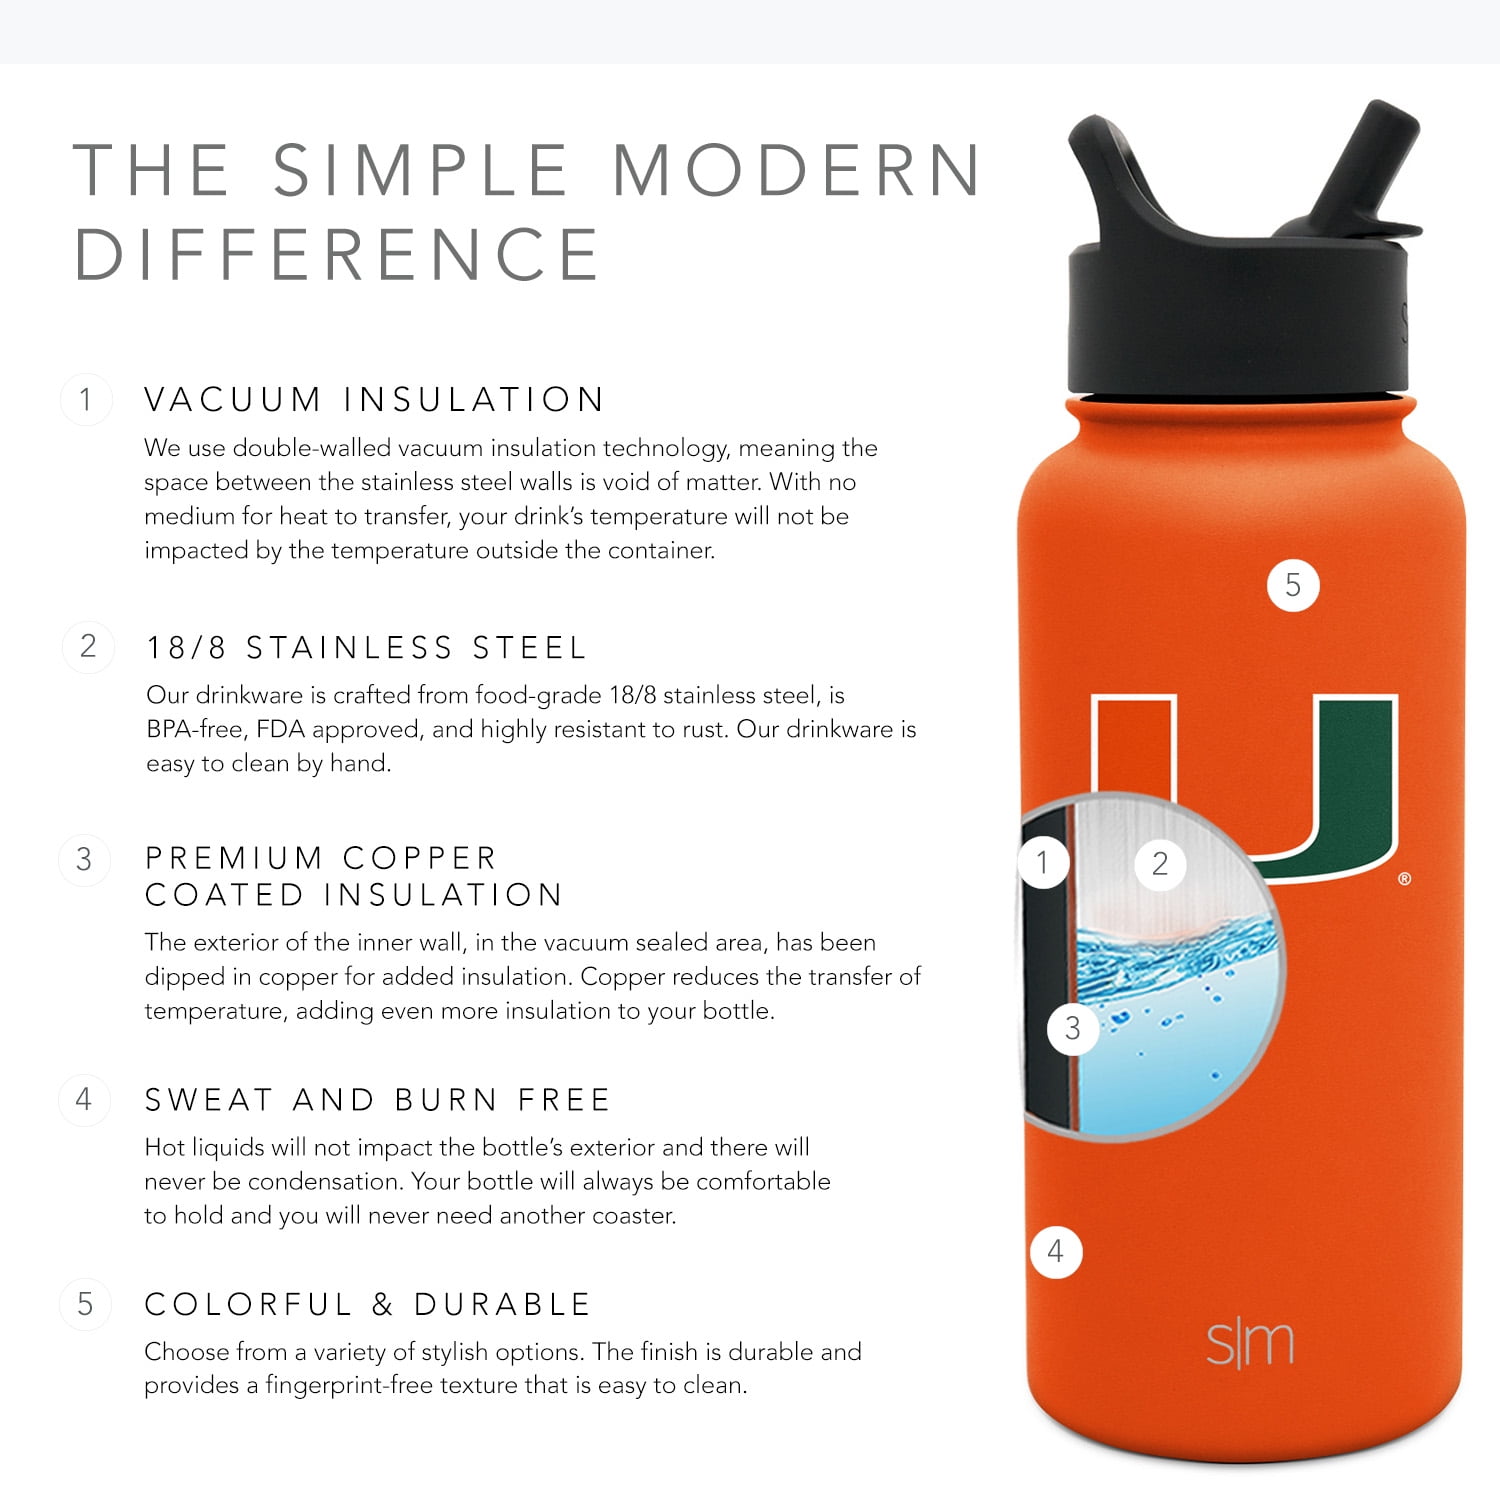 University of Miami 40 oz. Thermo Double-Wall Stainless Steel Water Bottle